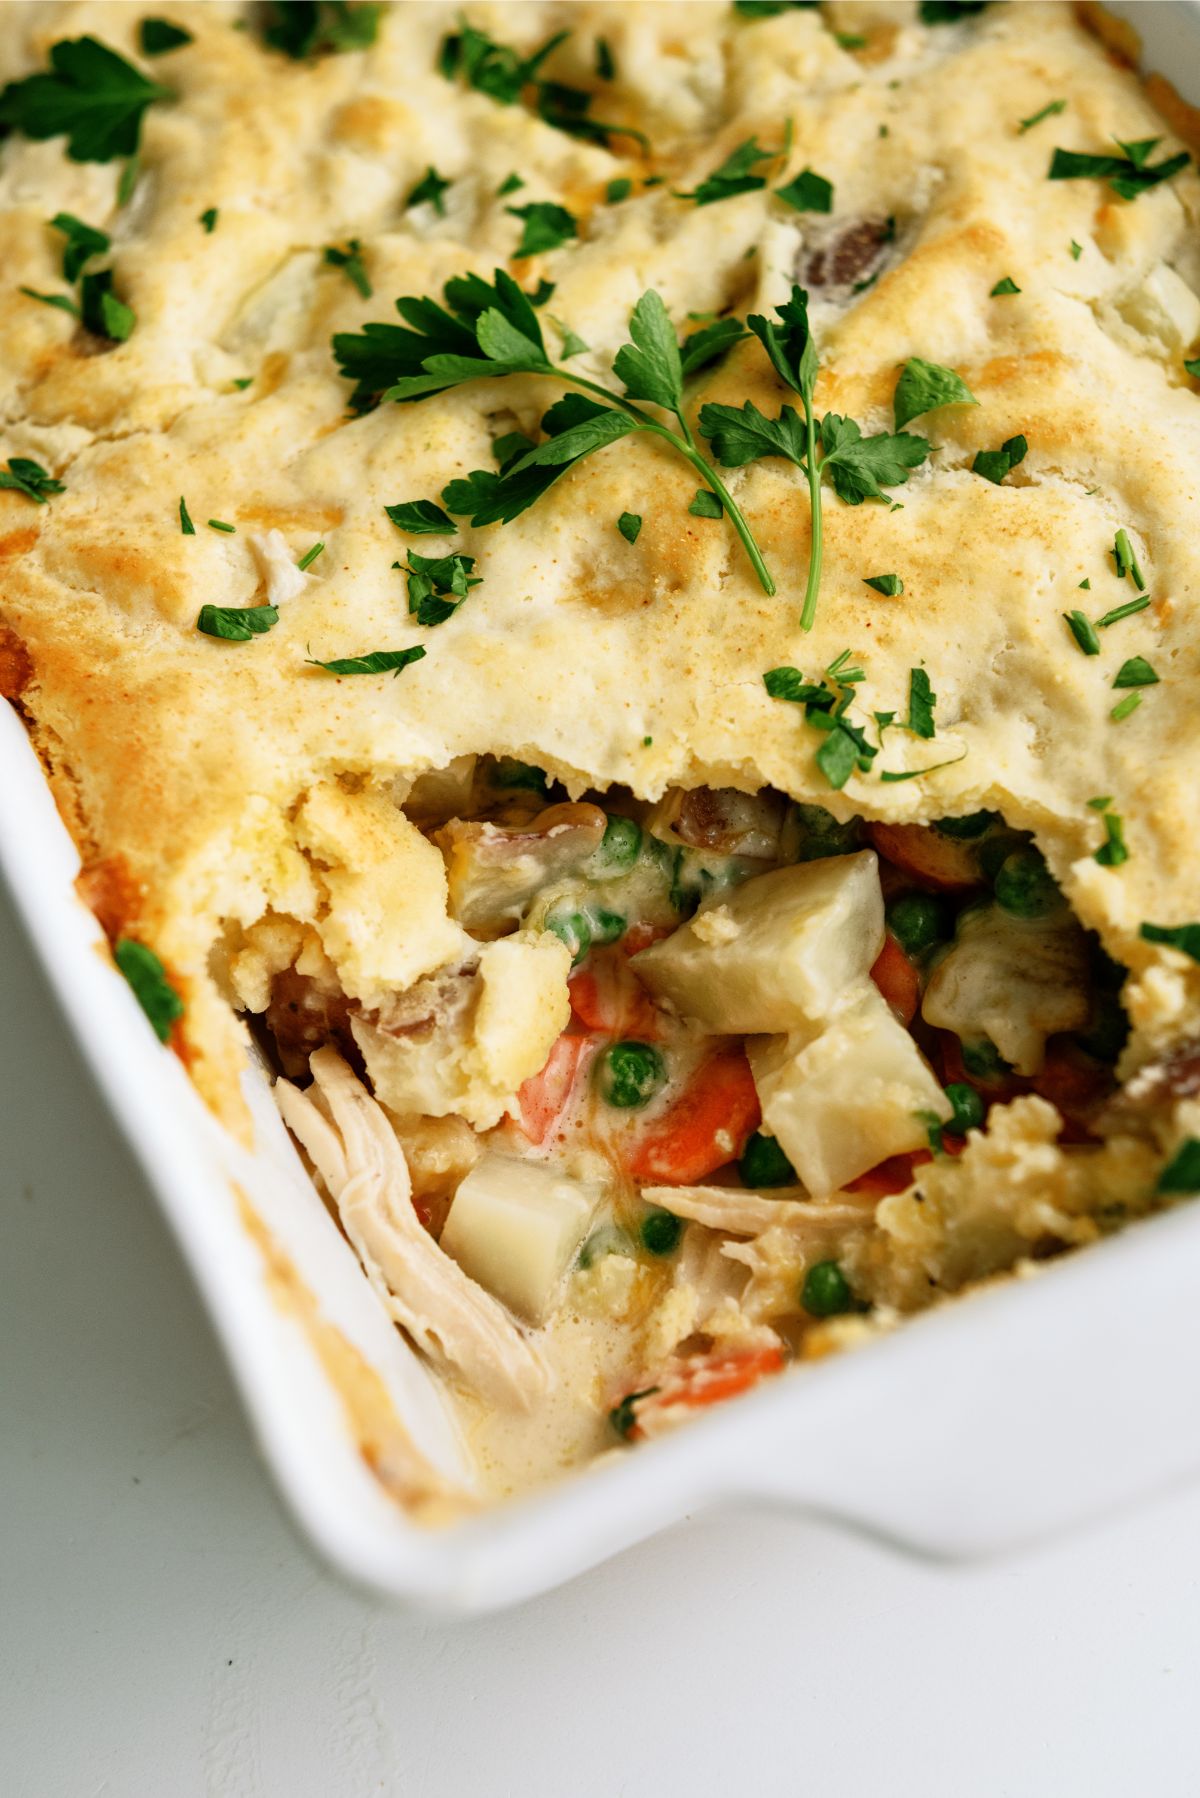 Baked Cheesy Chicken Pot Pie in casserole dish with the corner serving missing